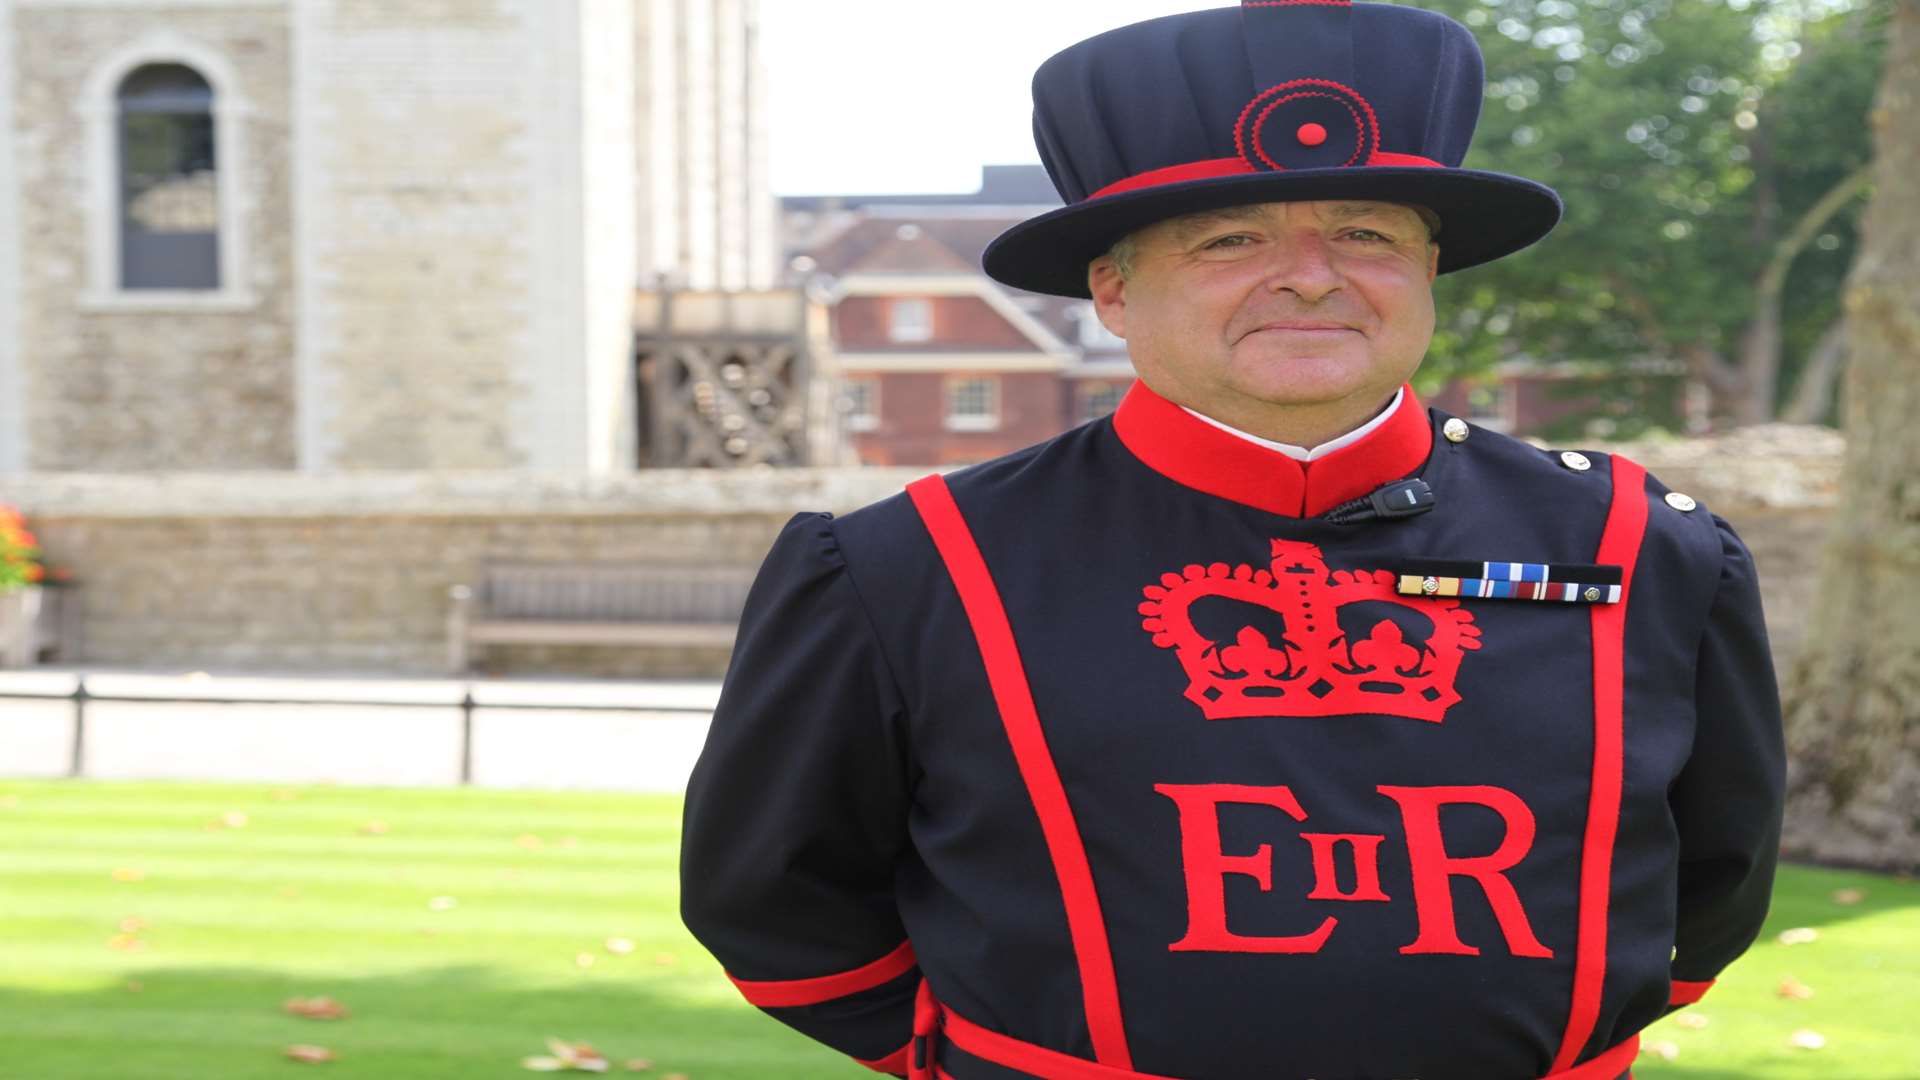 Gary Burridge joins the Tower of London as a Yeoman Warder. Pic: Historic Royal Palaces